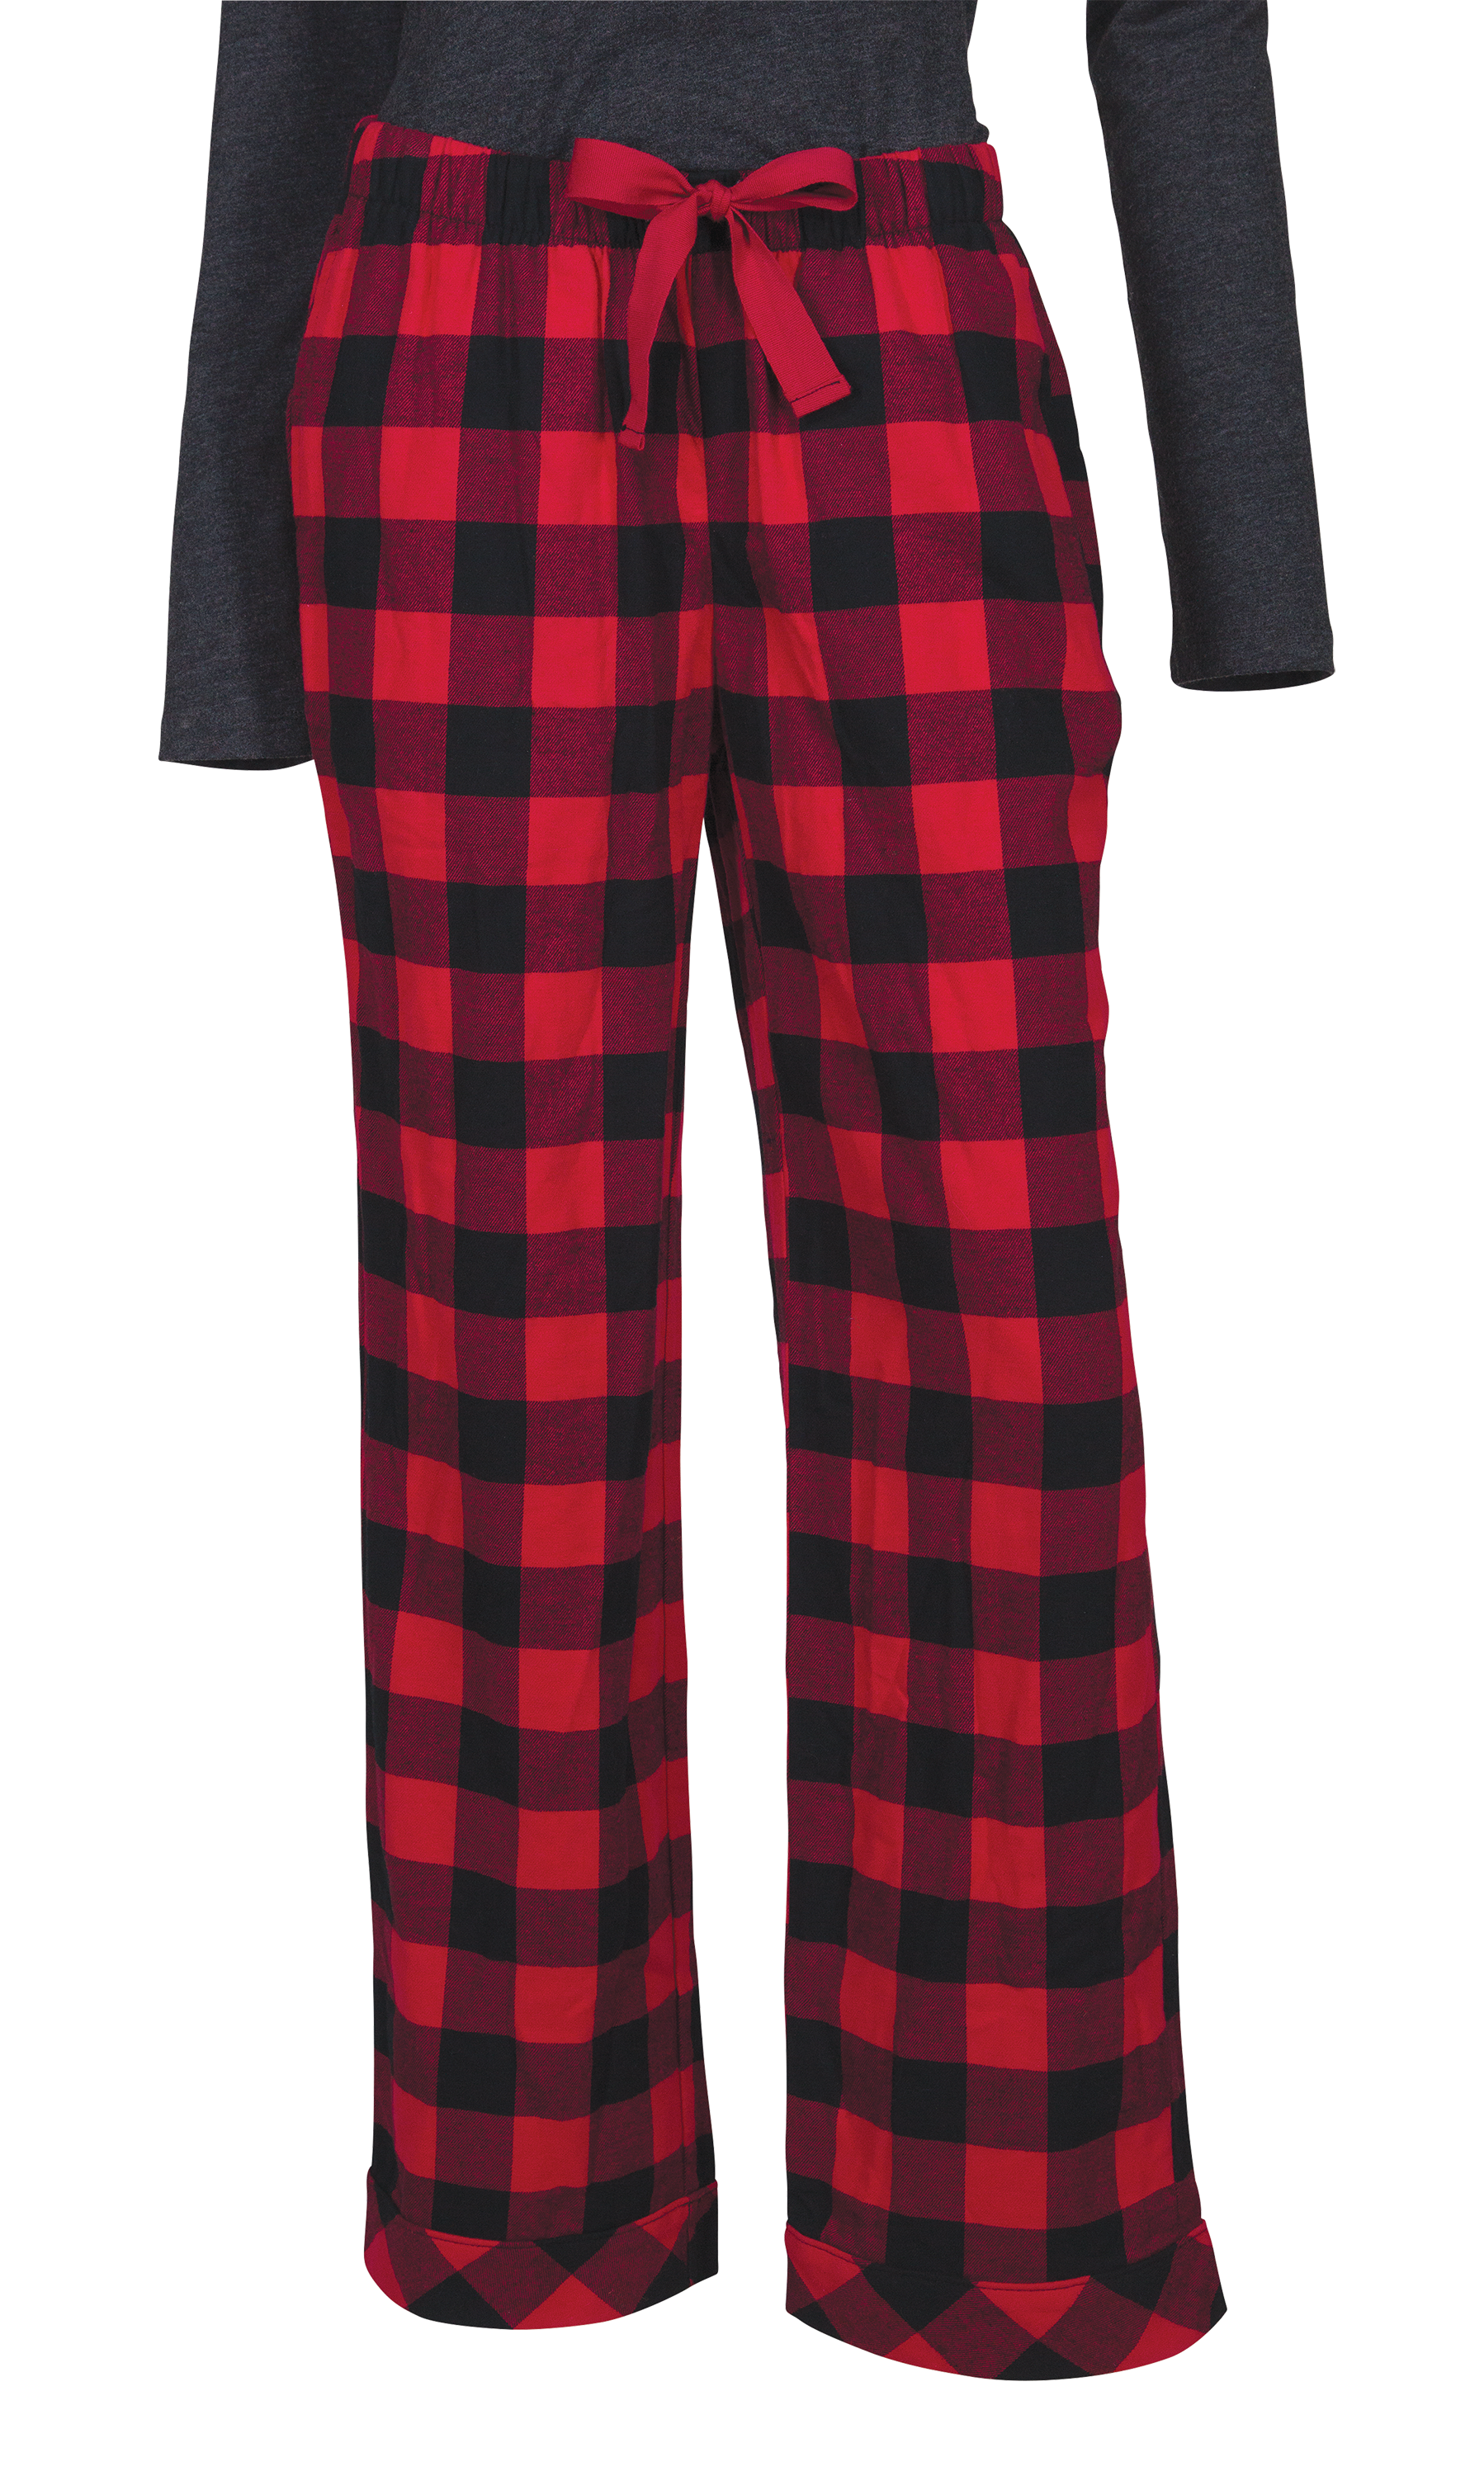 Natural Reflections Flannel Pajama Pants for Ladies | Bass Pro Shops